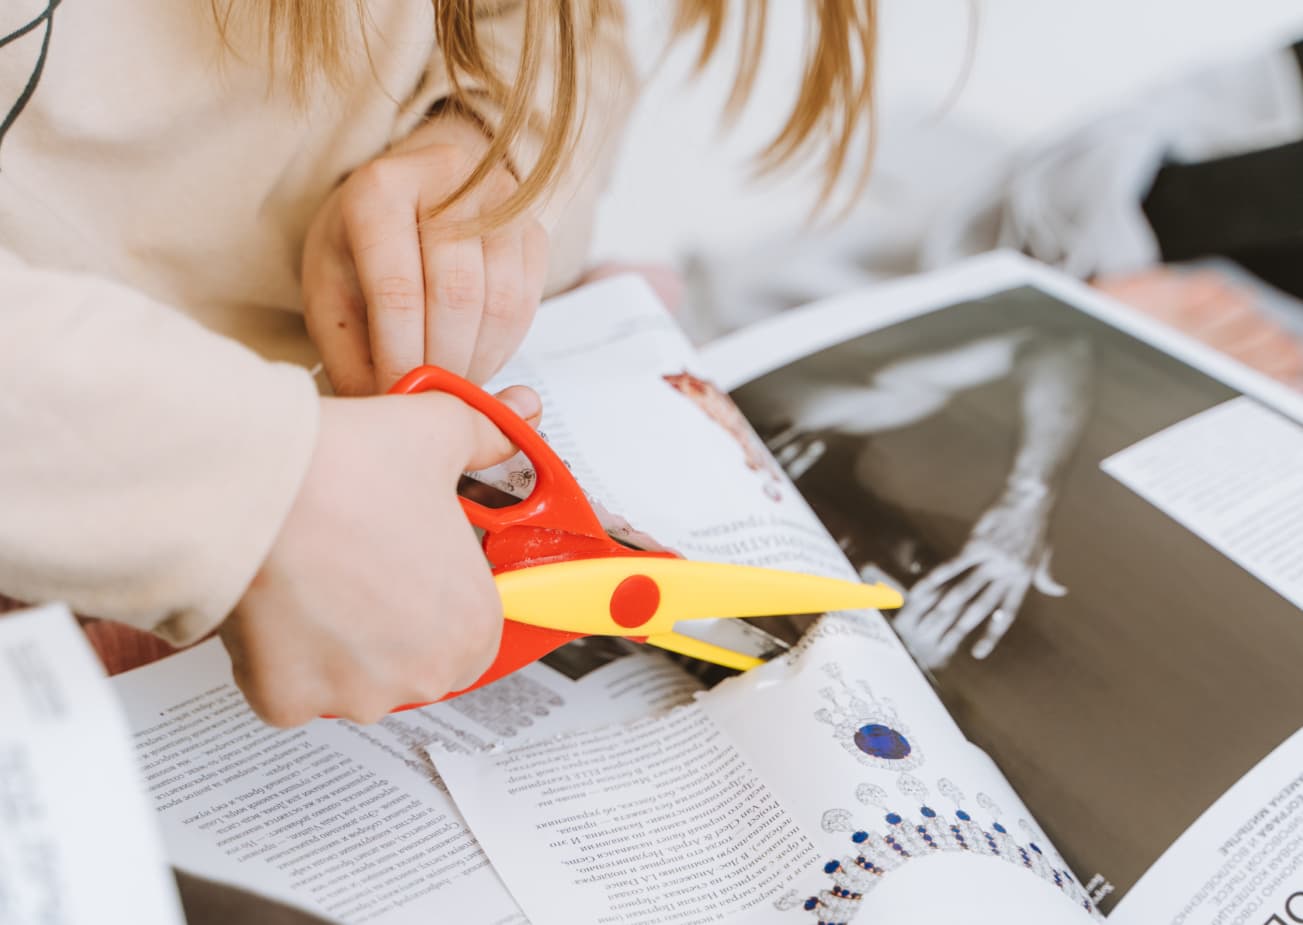 A child cutting out words from a magazine